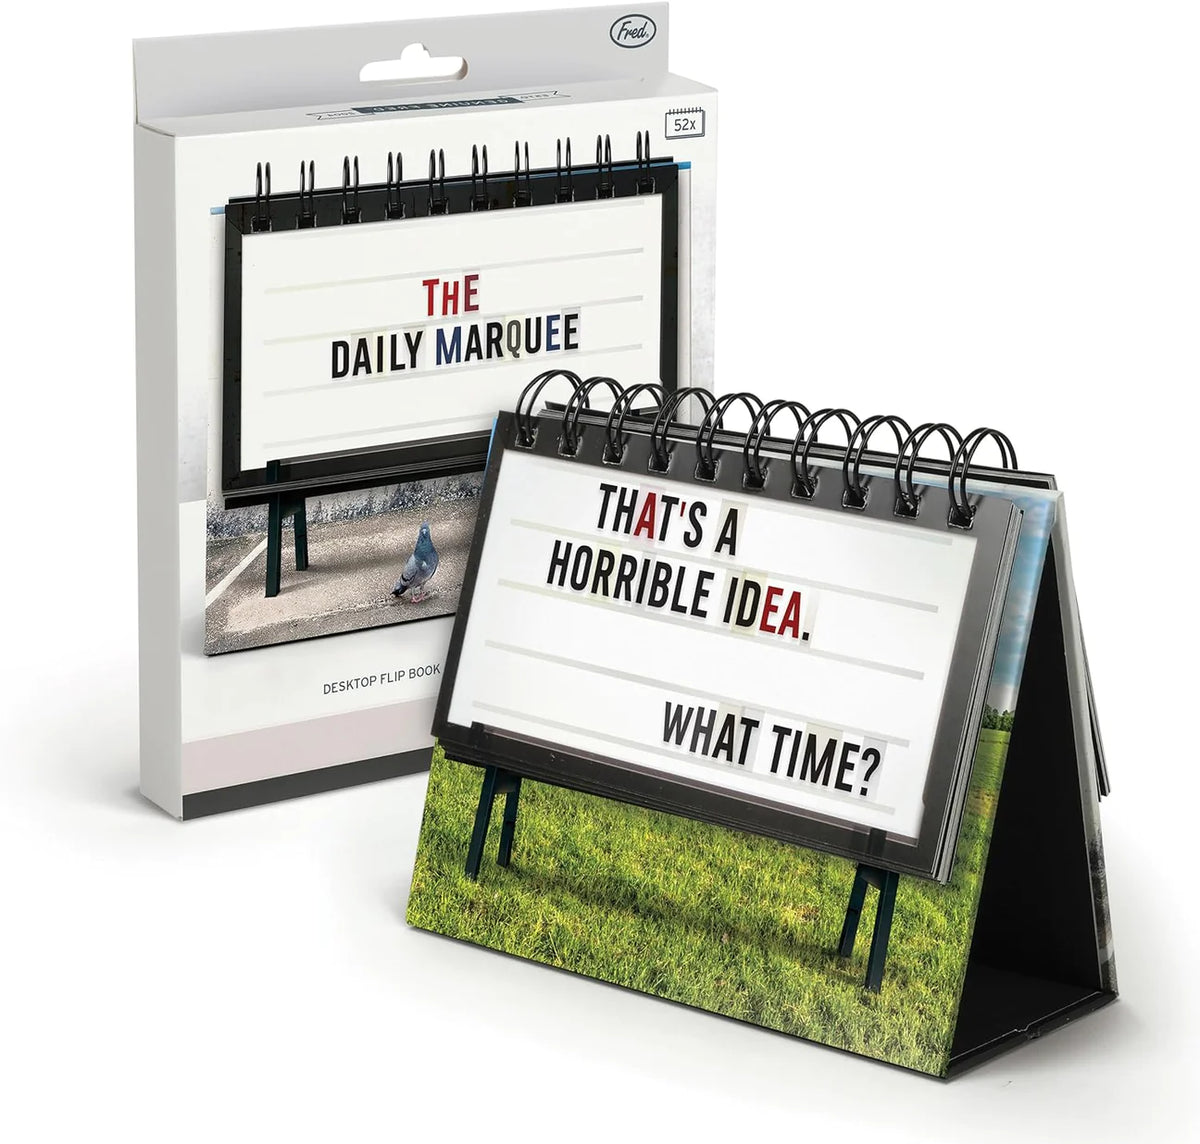 FRED The Daily Marquee Desktop Flip Book